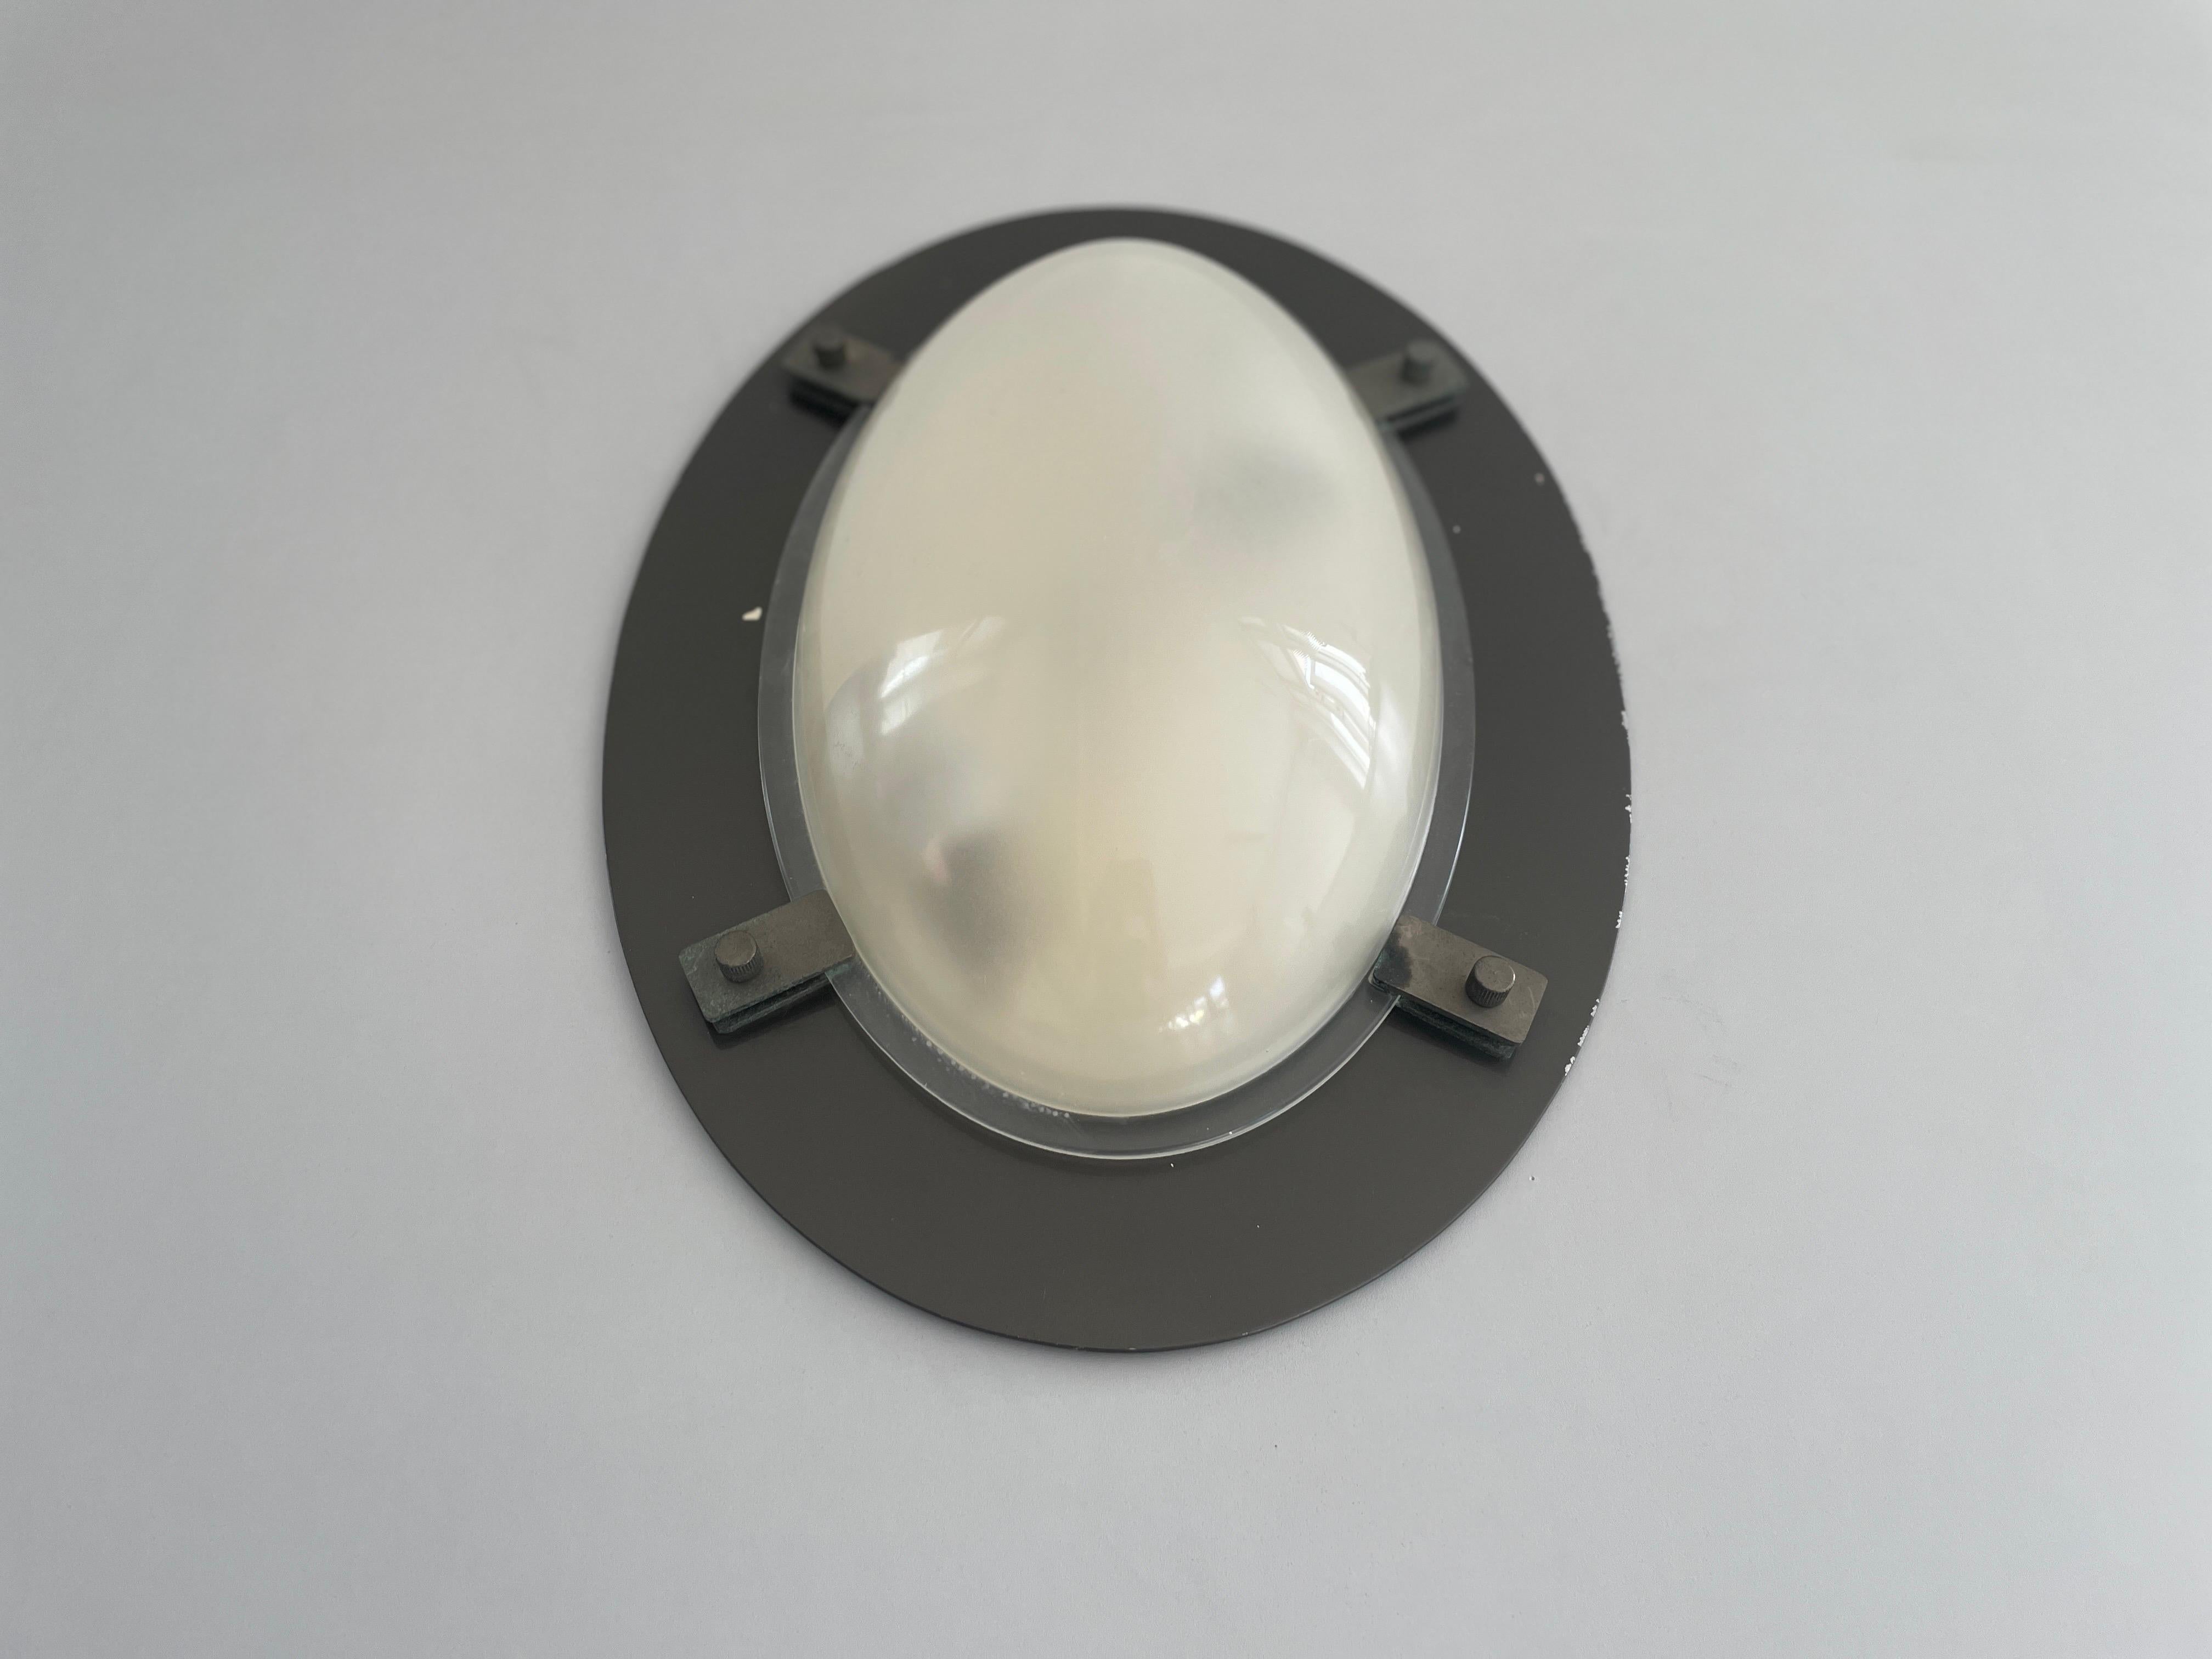 Oval Glass & Black backplate Industrial Wall or Ceiling Lamp, 1960s, Italy

Sculptural very elegant rare heavy ceiling lamp flush mount.

It is very ideal and suitable for all living areas.

Lamp is in good condition. No damage, no crack.
Wear